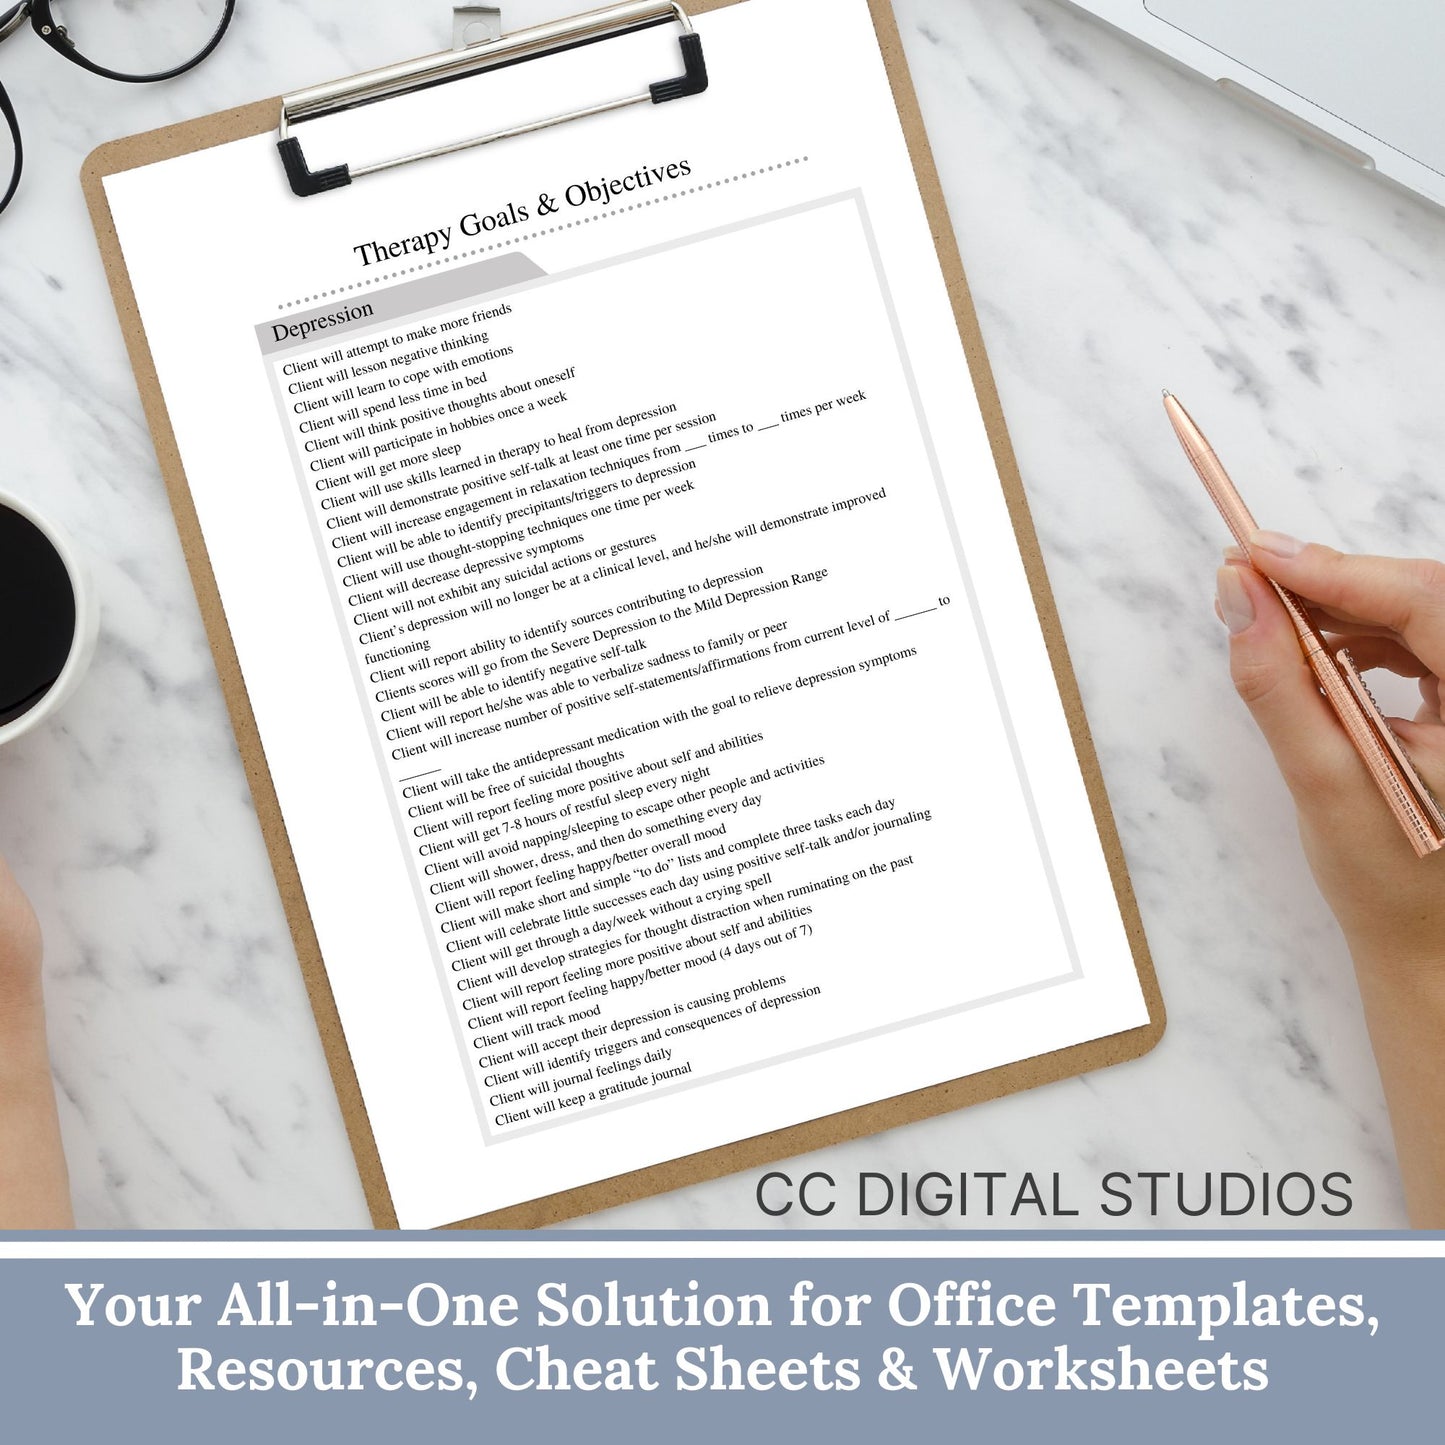 Therapist tool for productive goal and objective setting for your clients. Use this template as a reference point for creating your own client goals or cut and past right into your treatment plan.